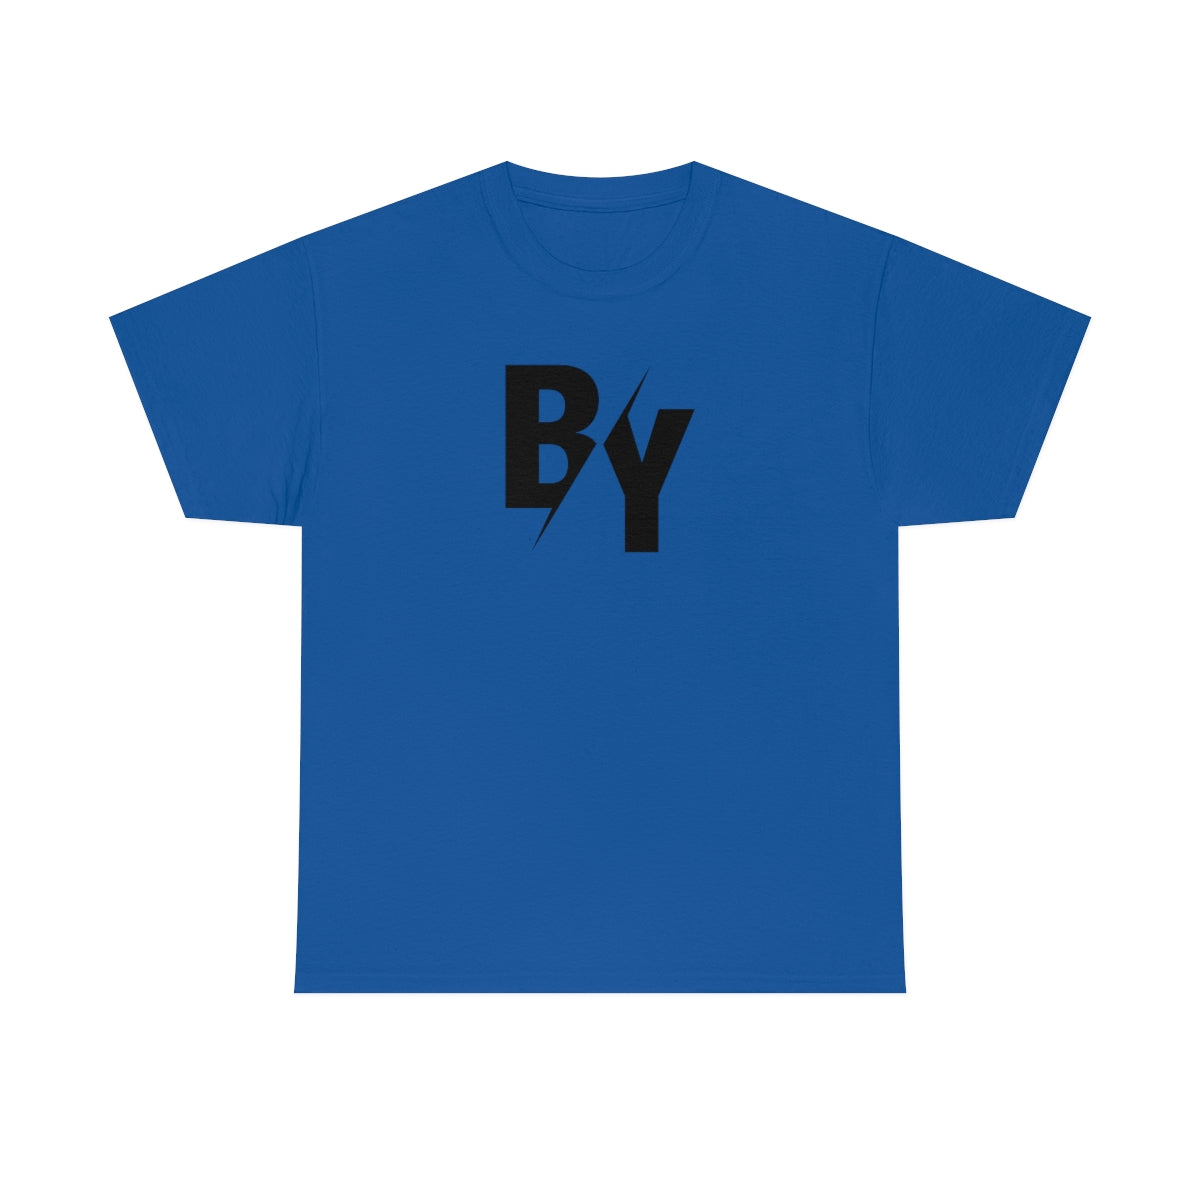 Breven Yarbro "BY" Tee